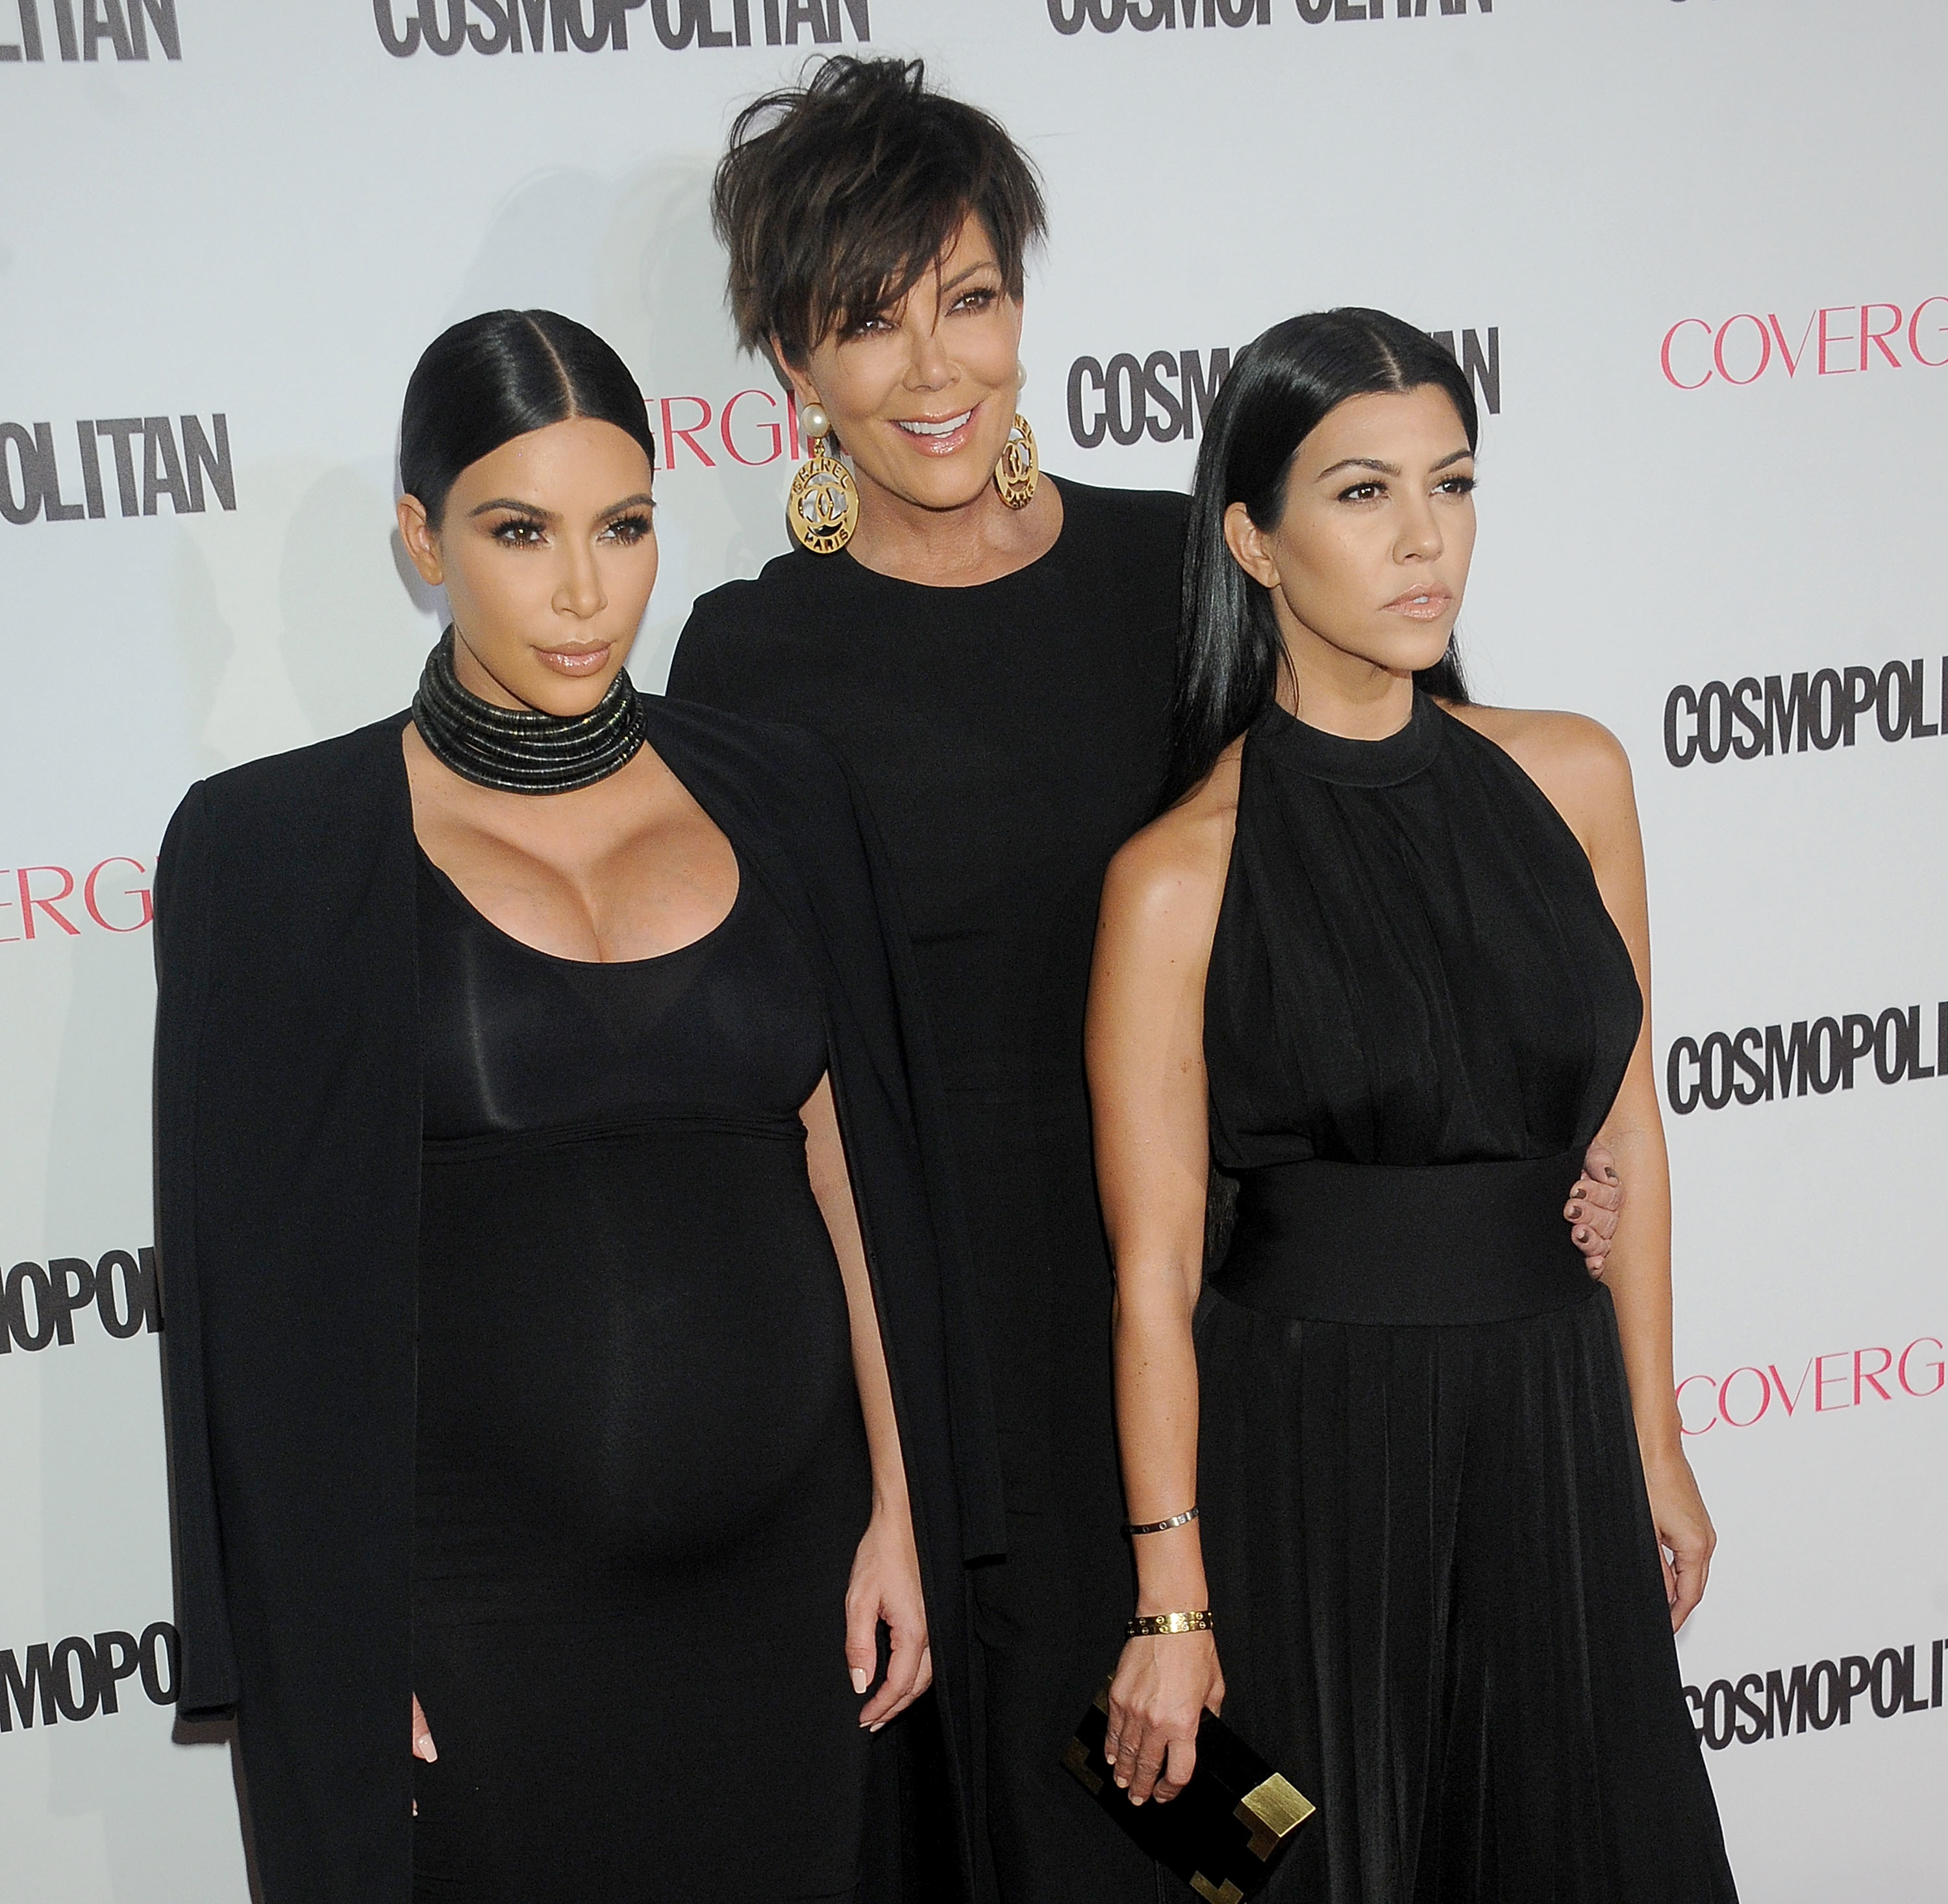 Kourtney and Kim with Kris at a media event